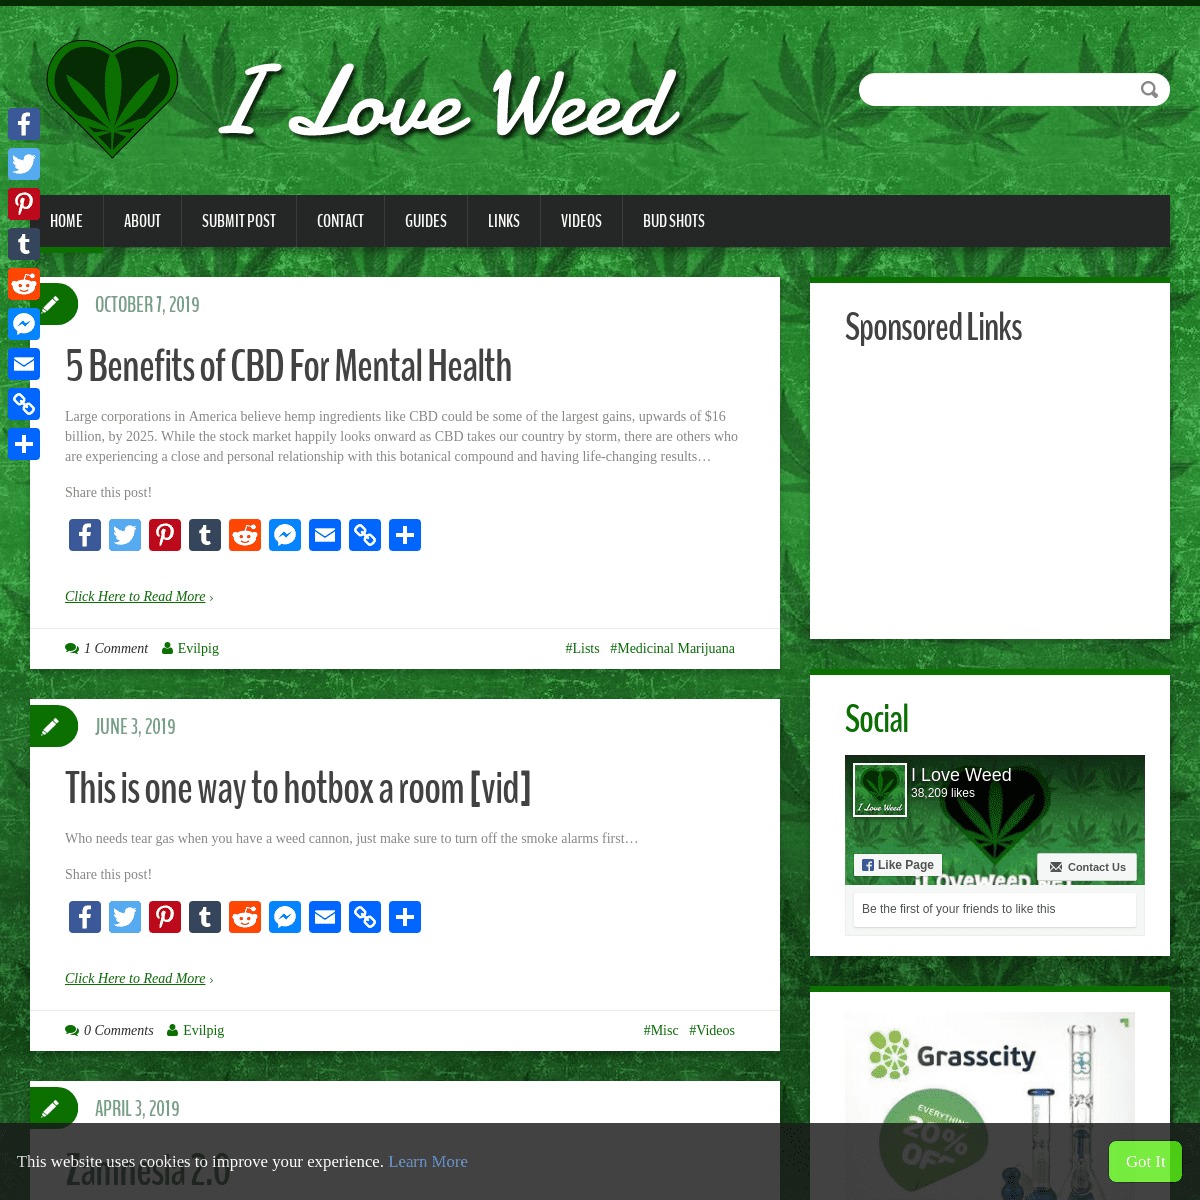 A complete backup of iloveweed.net